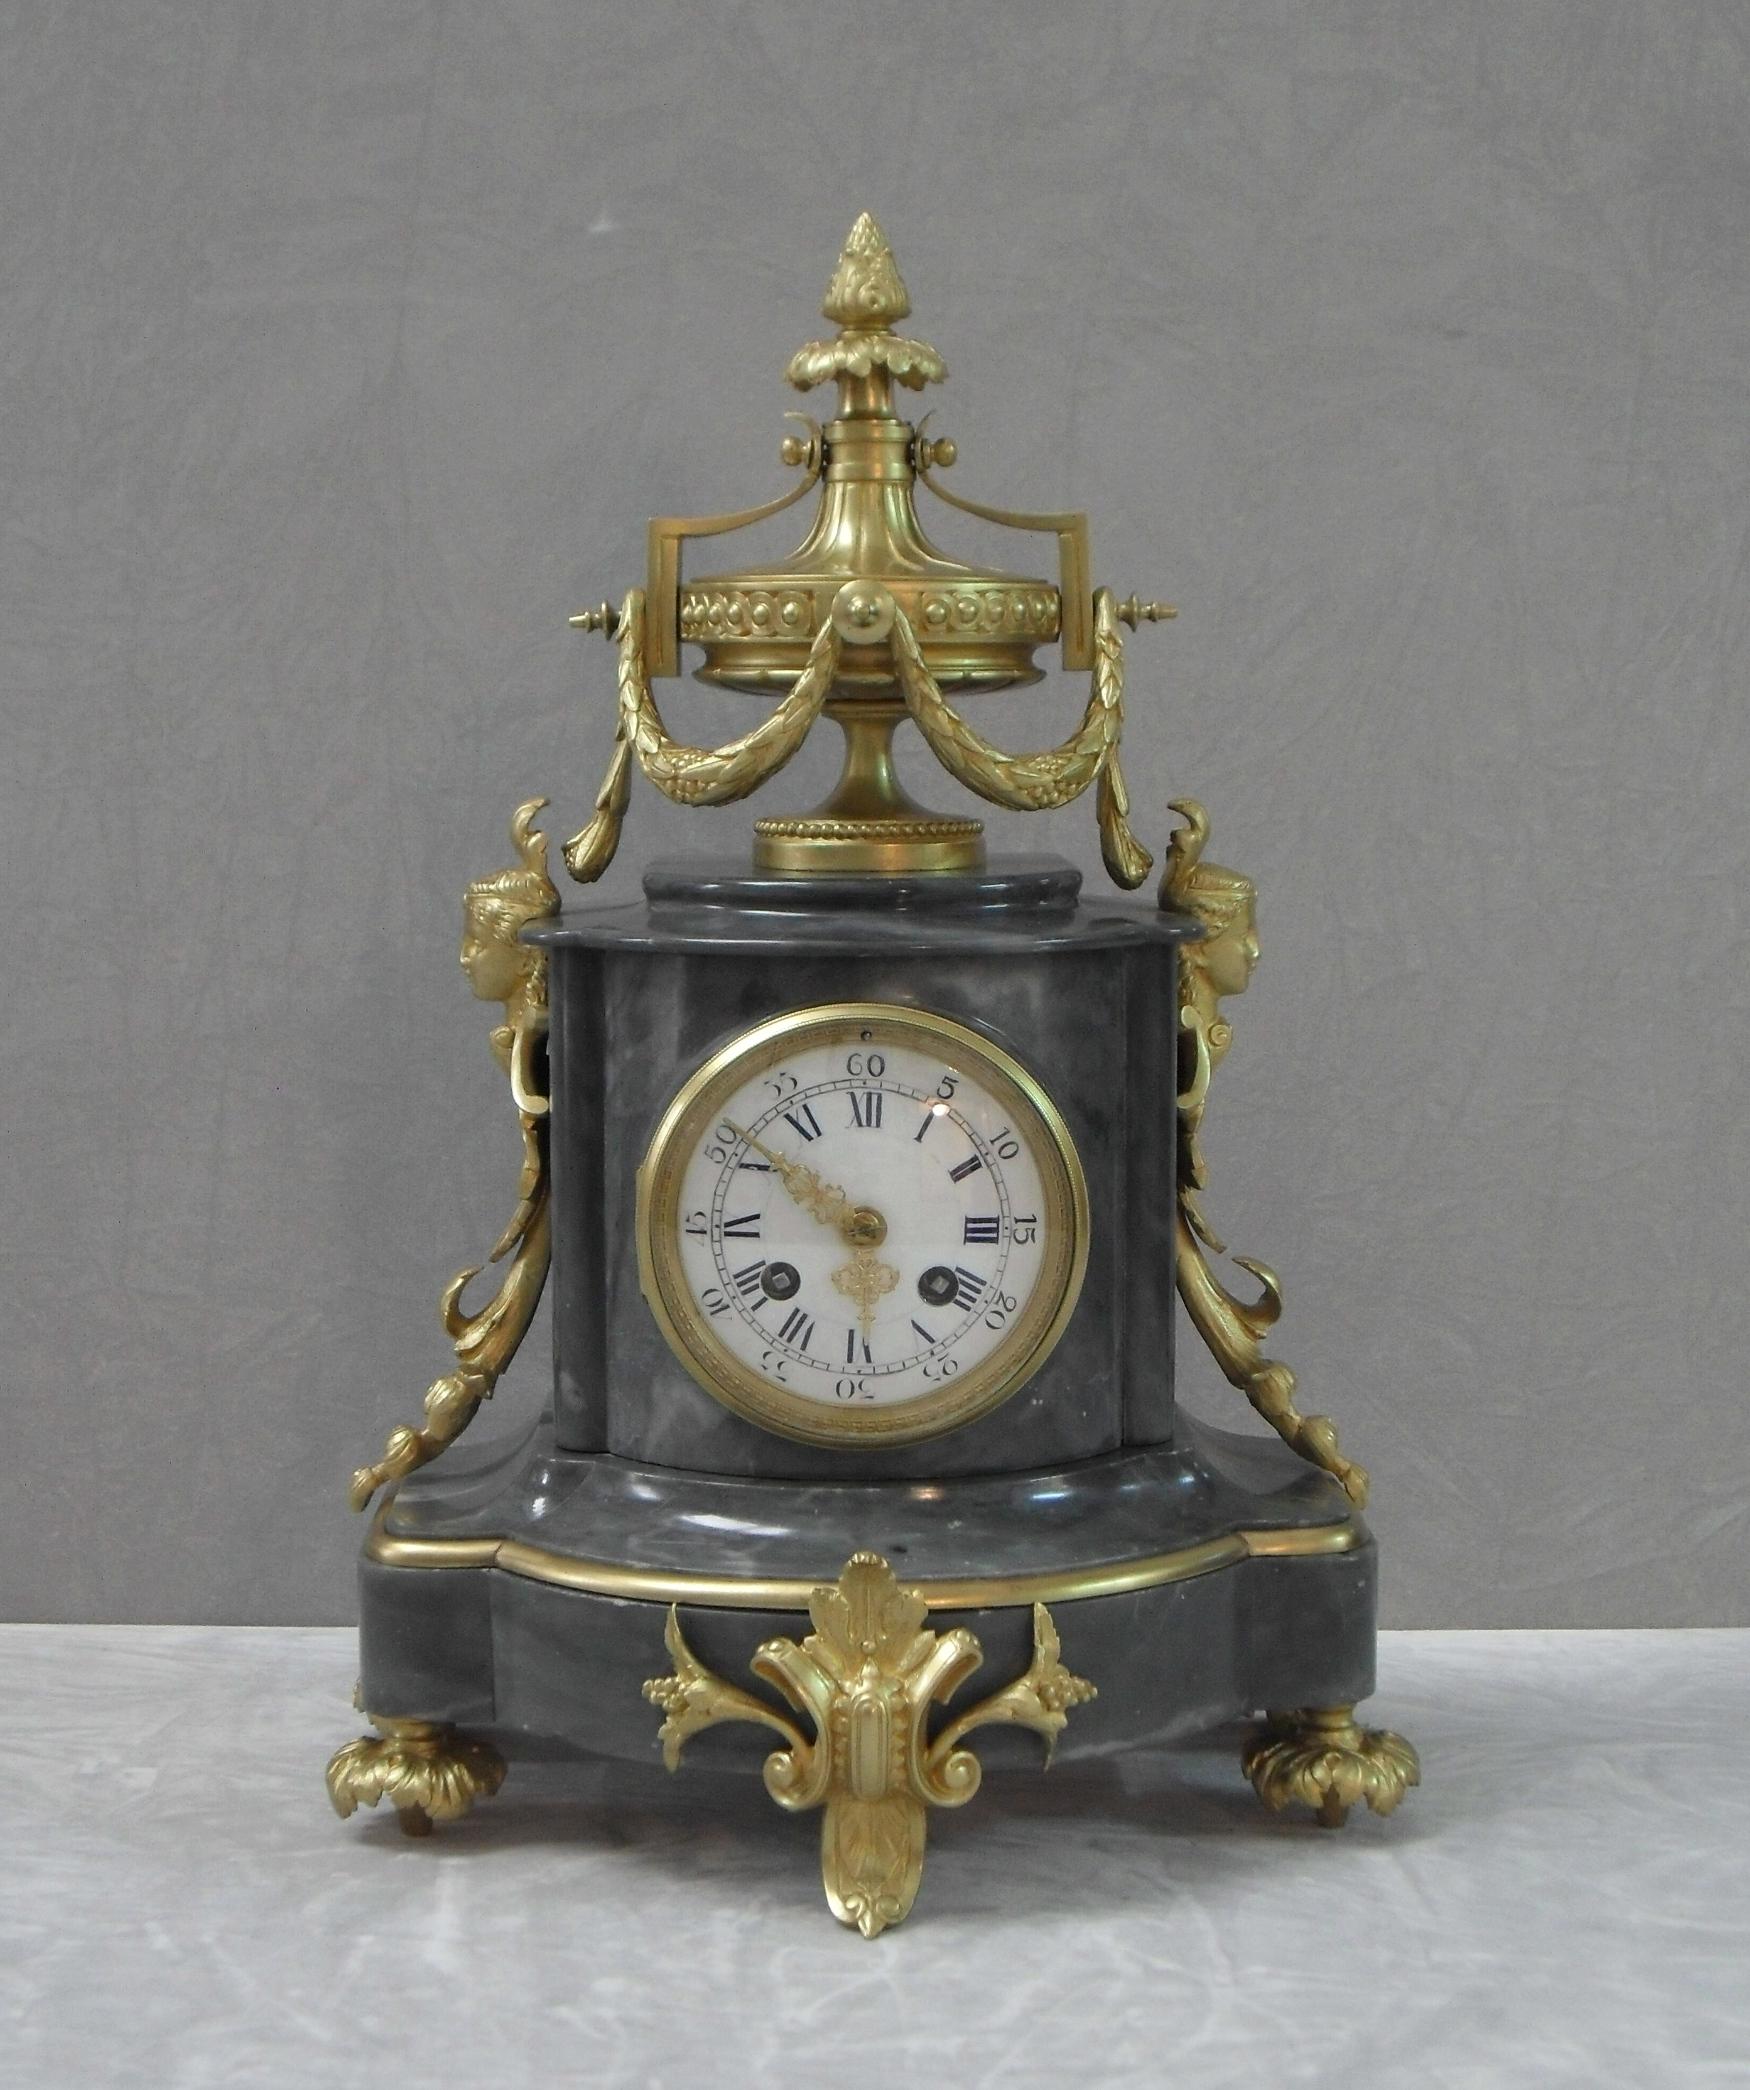 A very impressive French grey marble and bronze gilt ormolu clock set comprising of two four branch candelabra garnitures and a mantel clock in the Louis XVI style. The candelabras have a scrolling leaf and floral branch design with marble urn stood